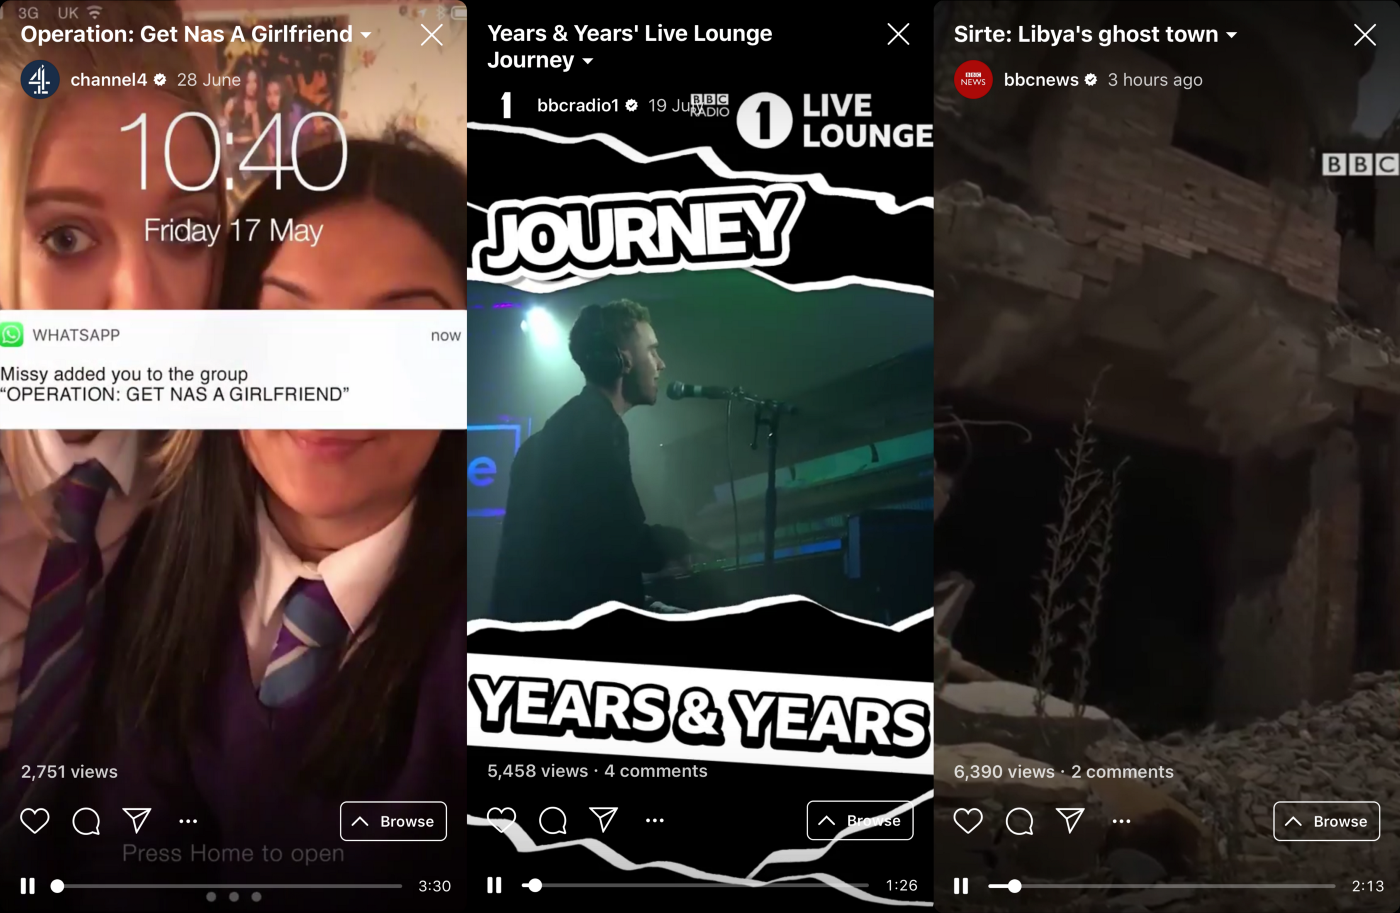 IGTV screenshots from Channel4 and BBC